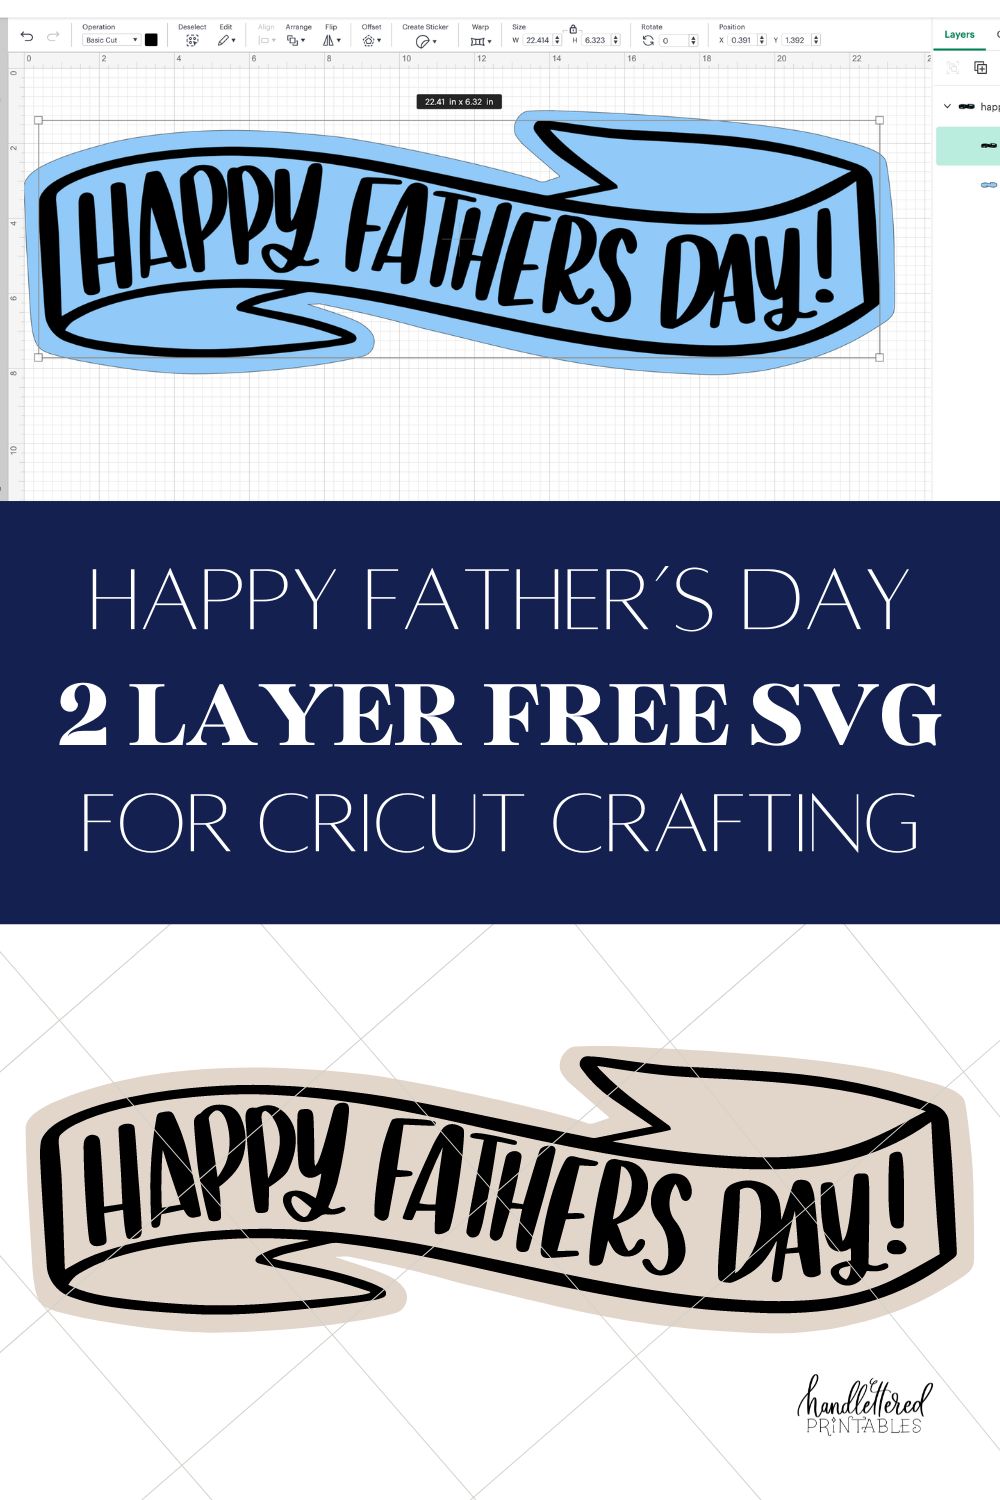 Happy Father's Day banner cut file designed with modern hand lettering and illustrated banner, second layer is an offset background. Top image shows the design uploaded to Cricut design space, bottom image shows the design on a white background text over reads: happy father's day 2 layer free SVG for cricut crafting